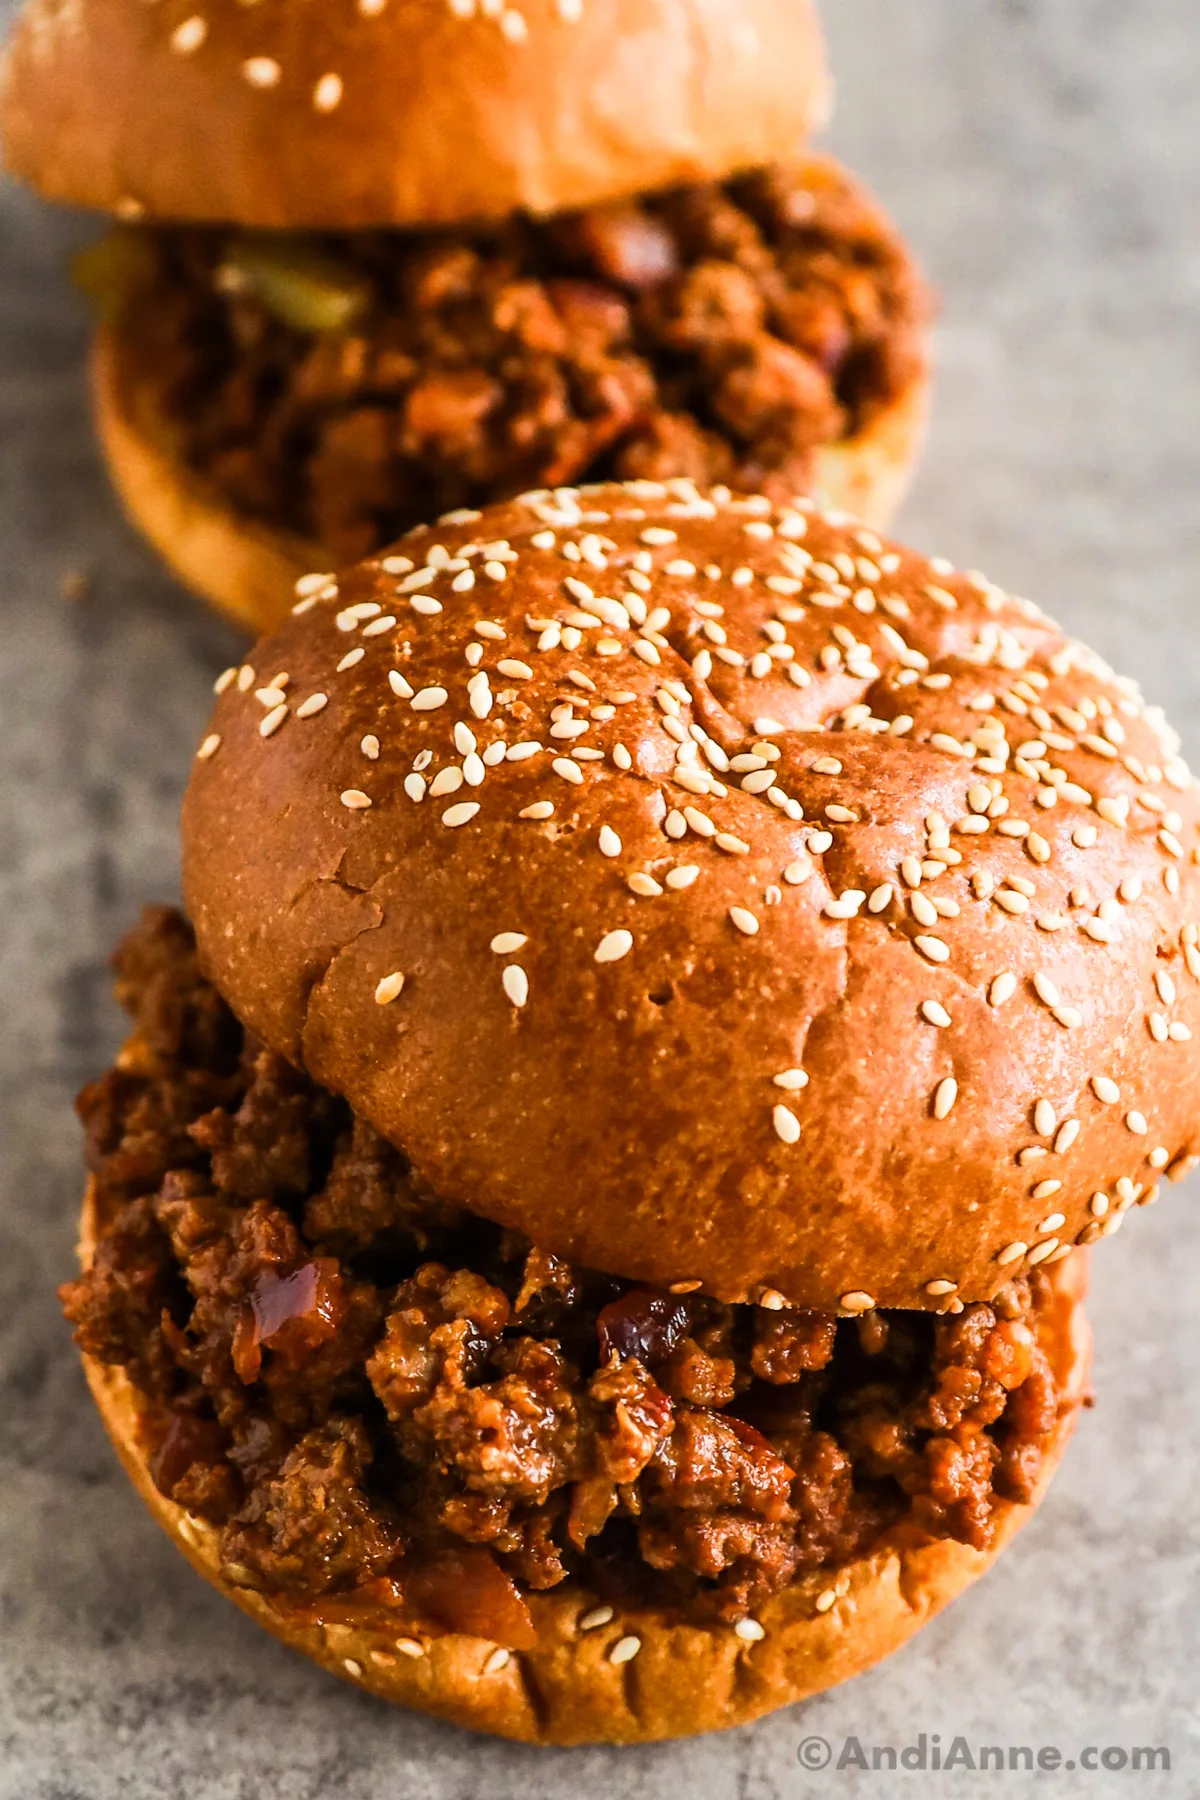 Two sloppy joes with hamburger buns.